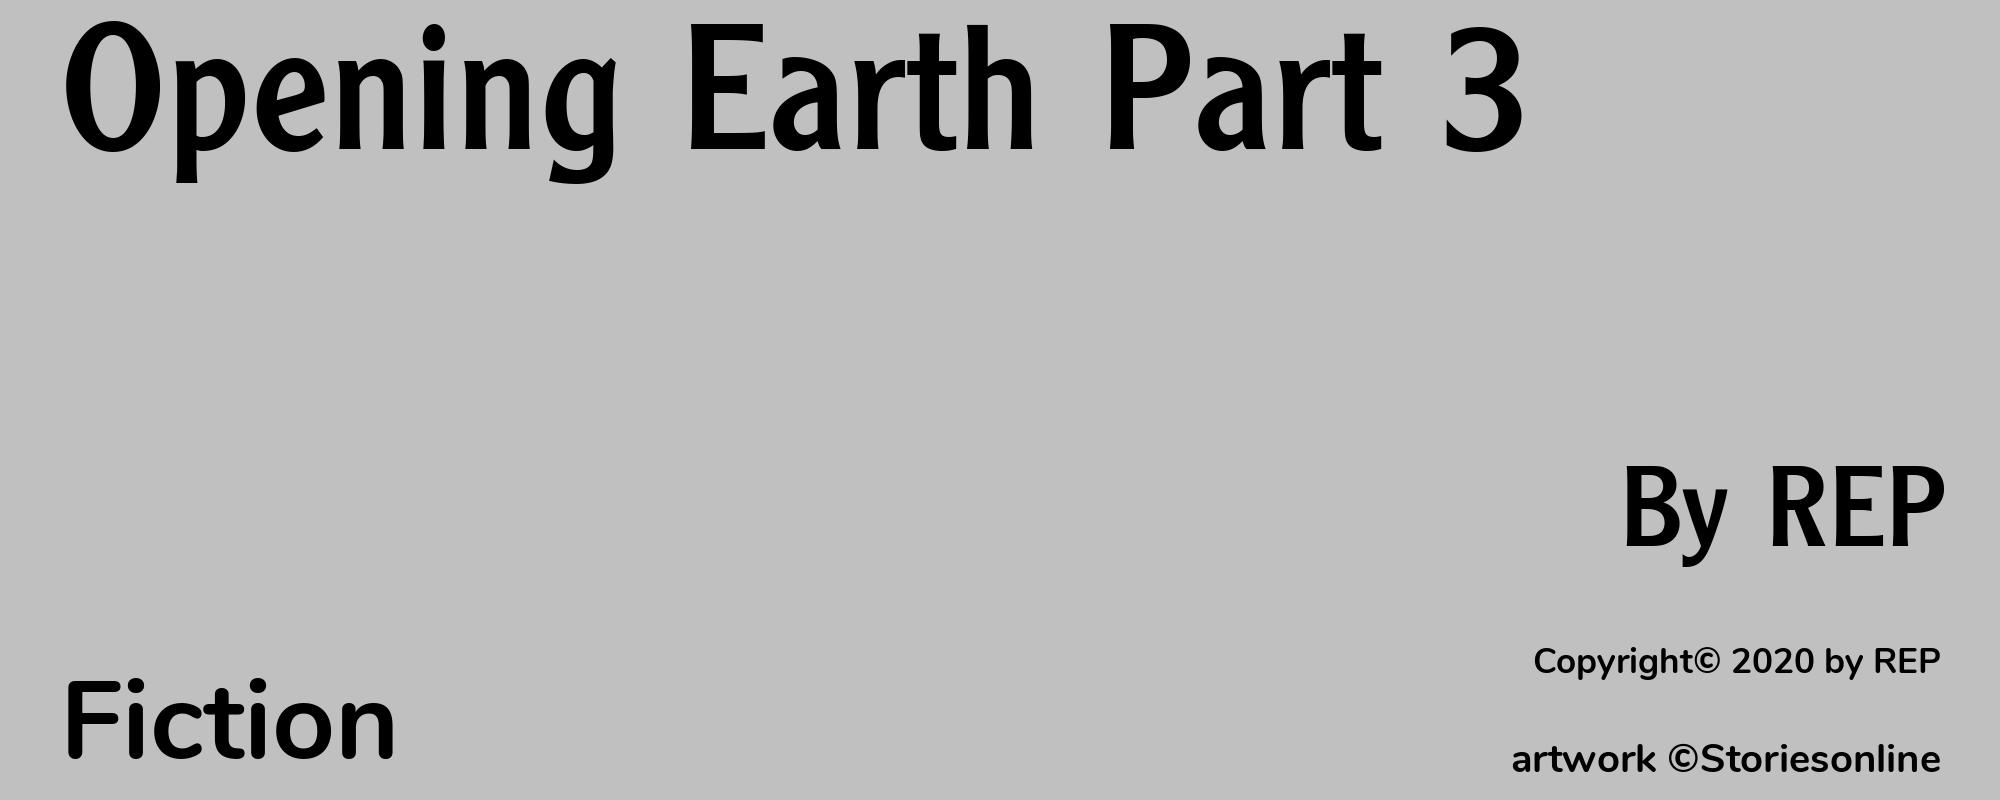 Opening Earth Part 3 - Cover